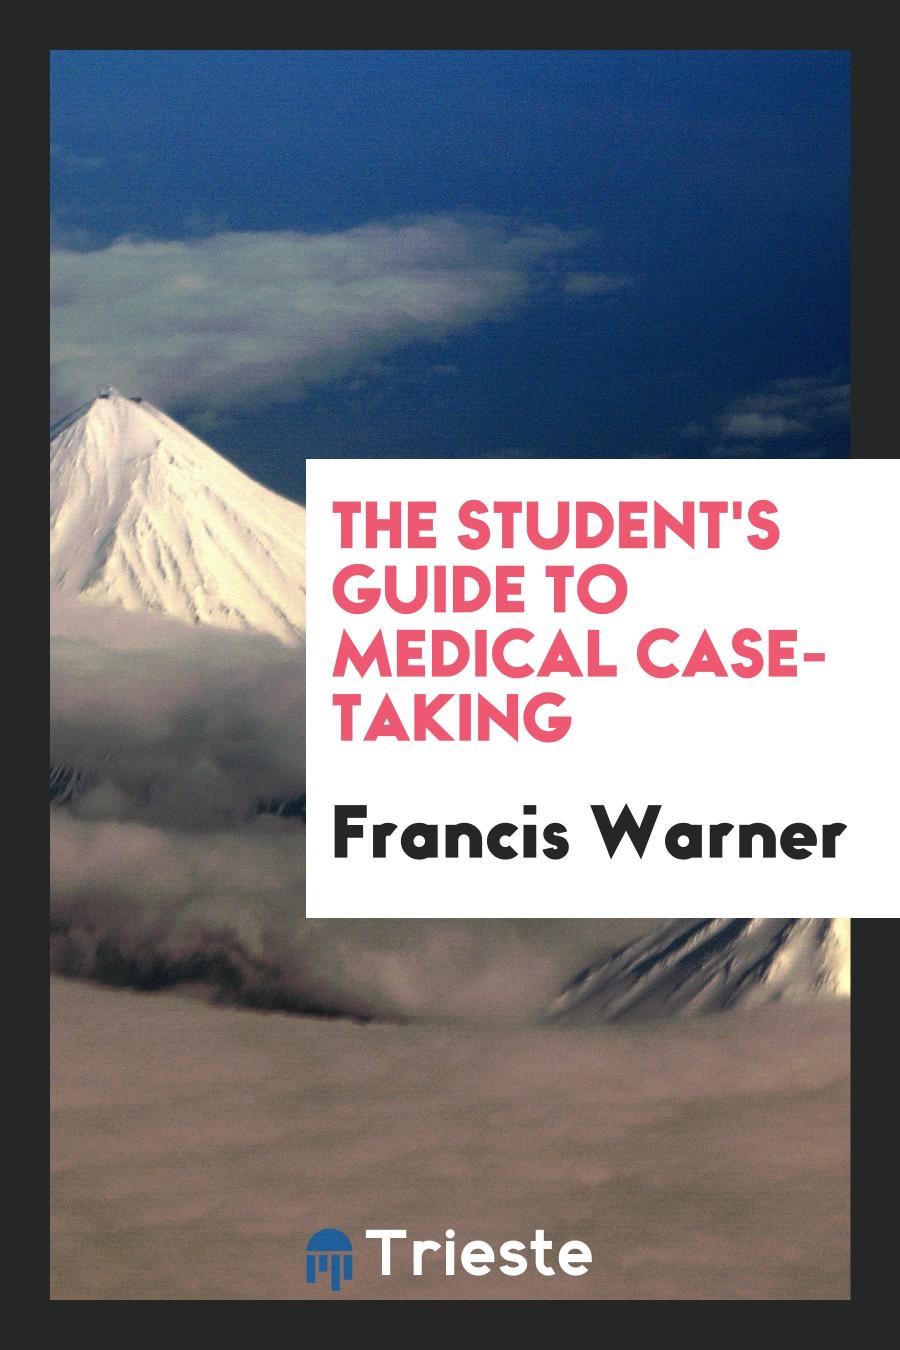 The Student's Guide to Medical Case-Taking